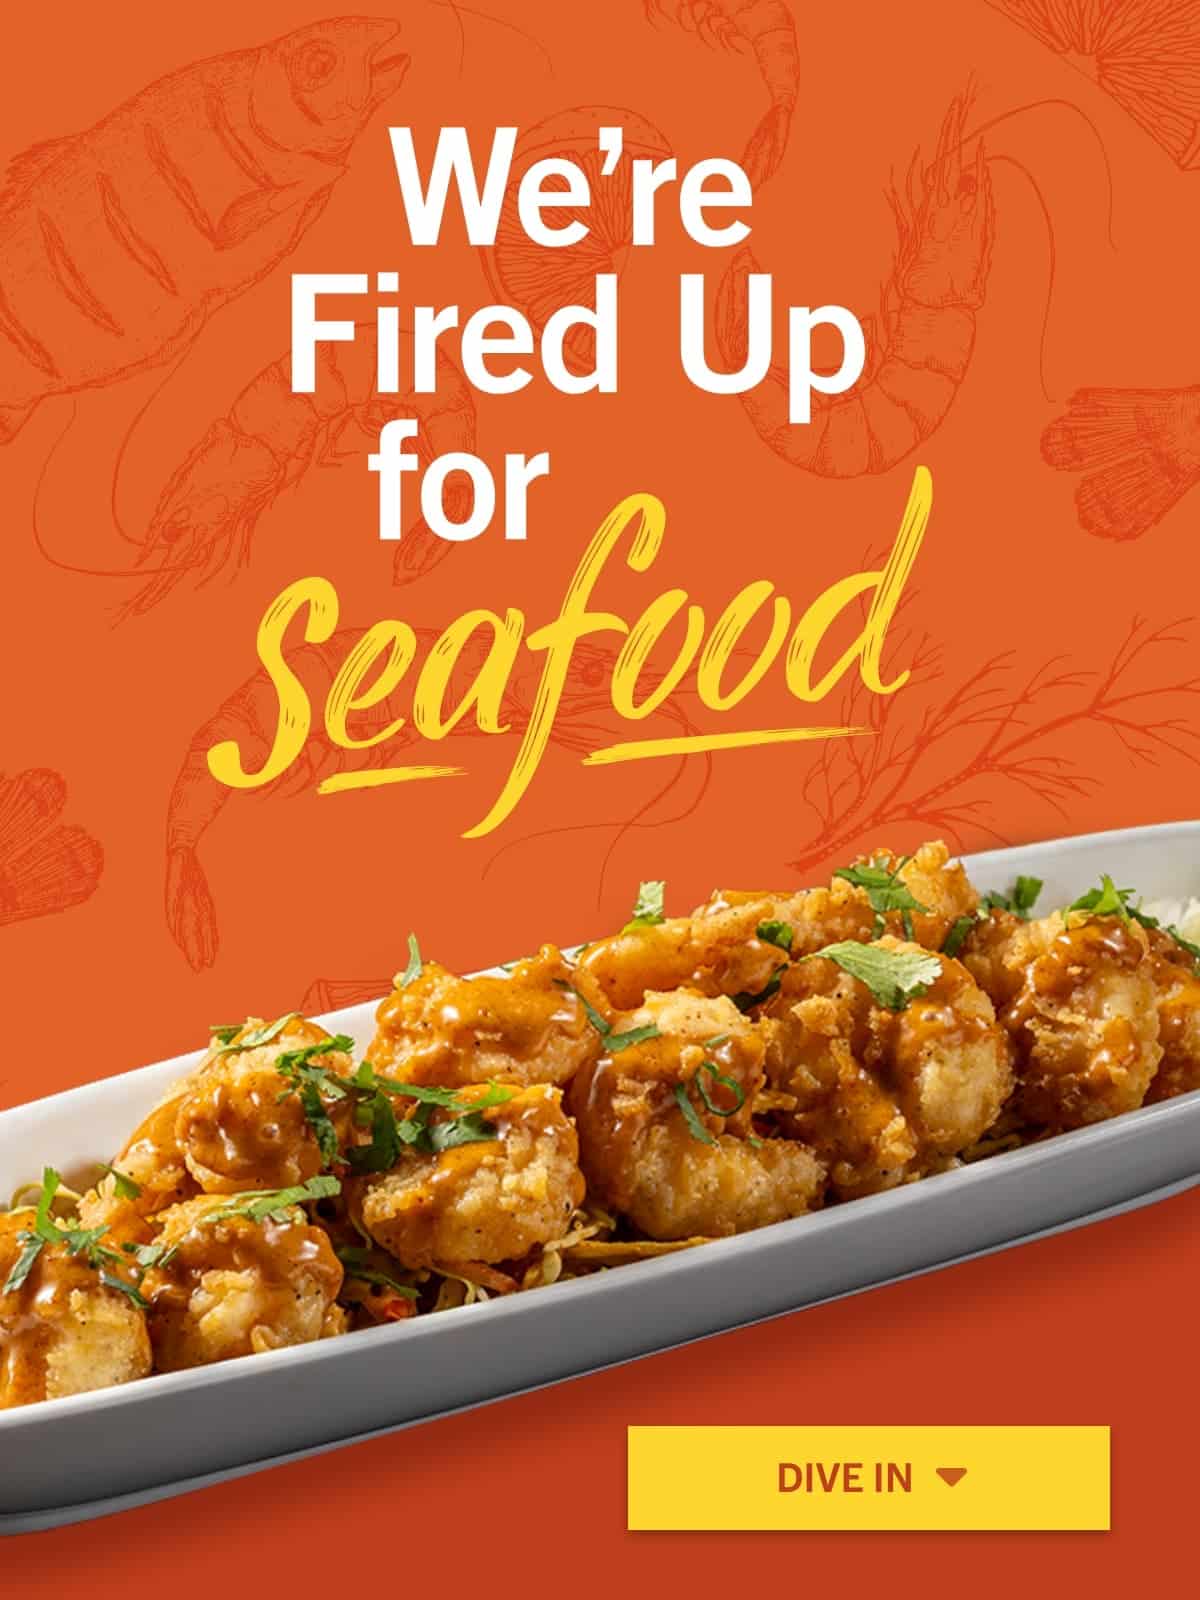 We're Fired Up for Seafood